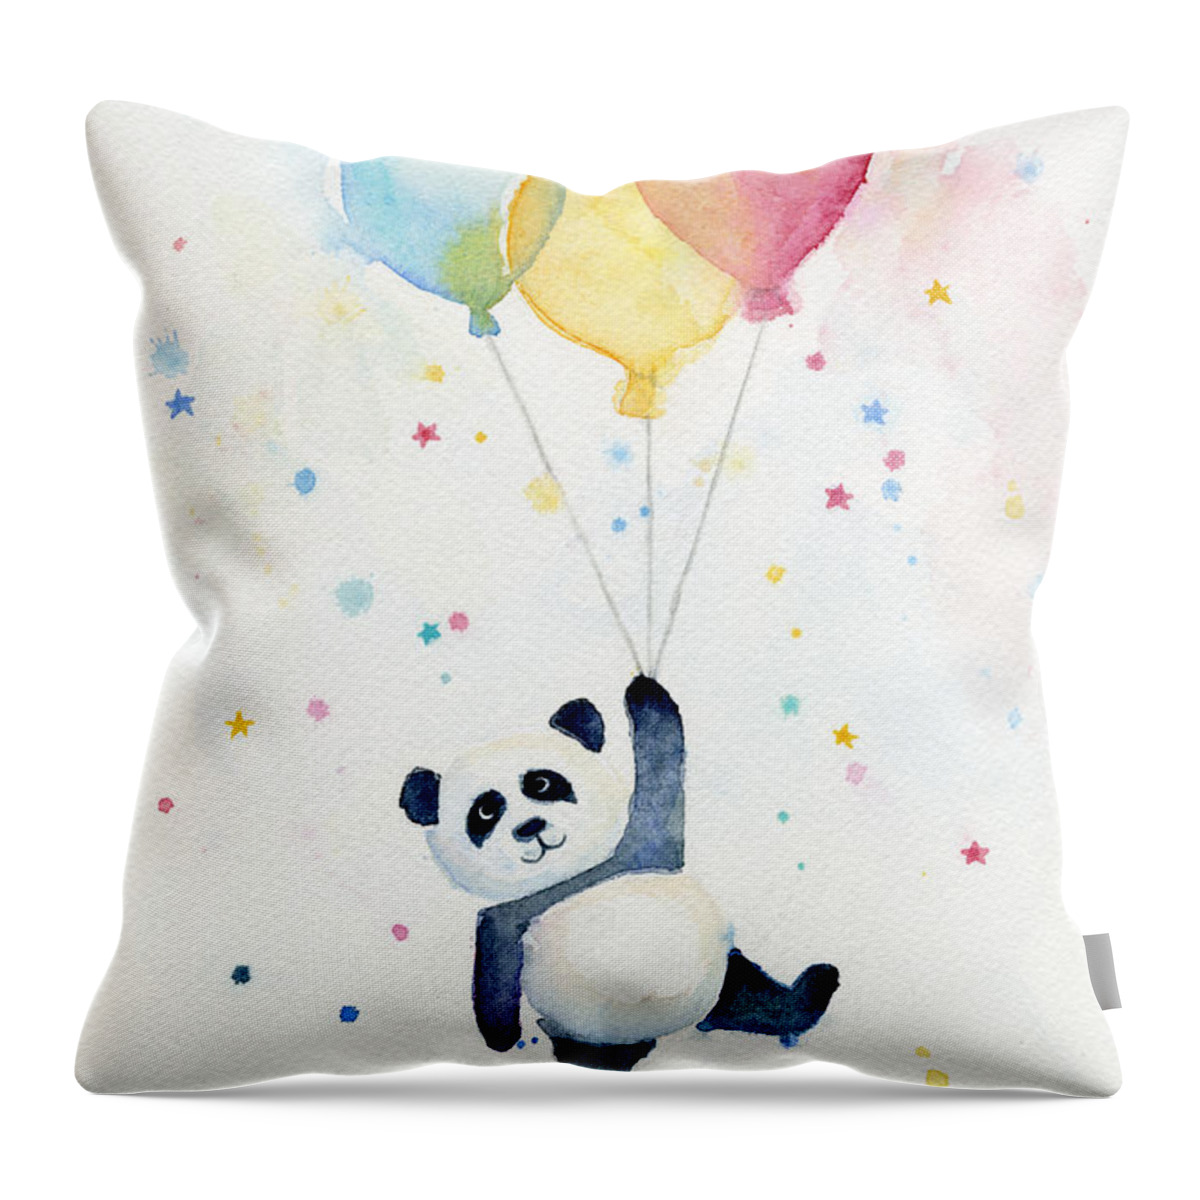 Panda Throw Pillow featuring the painting Panda Floating with Balloons by Olga Shvartsur